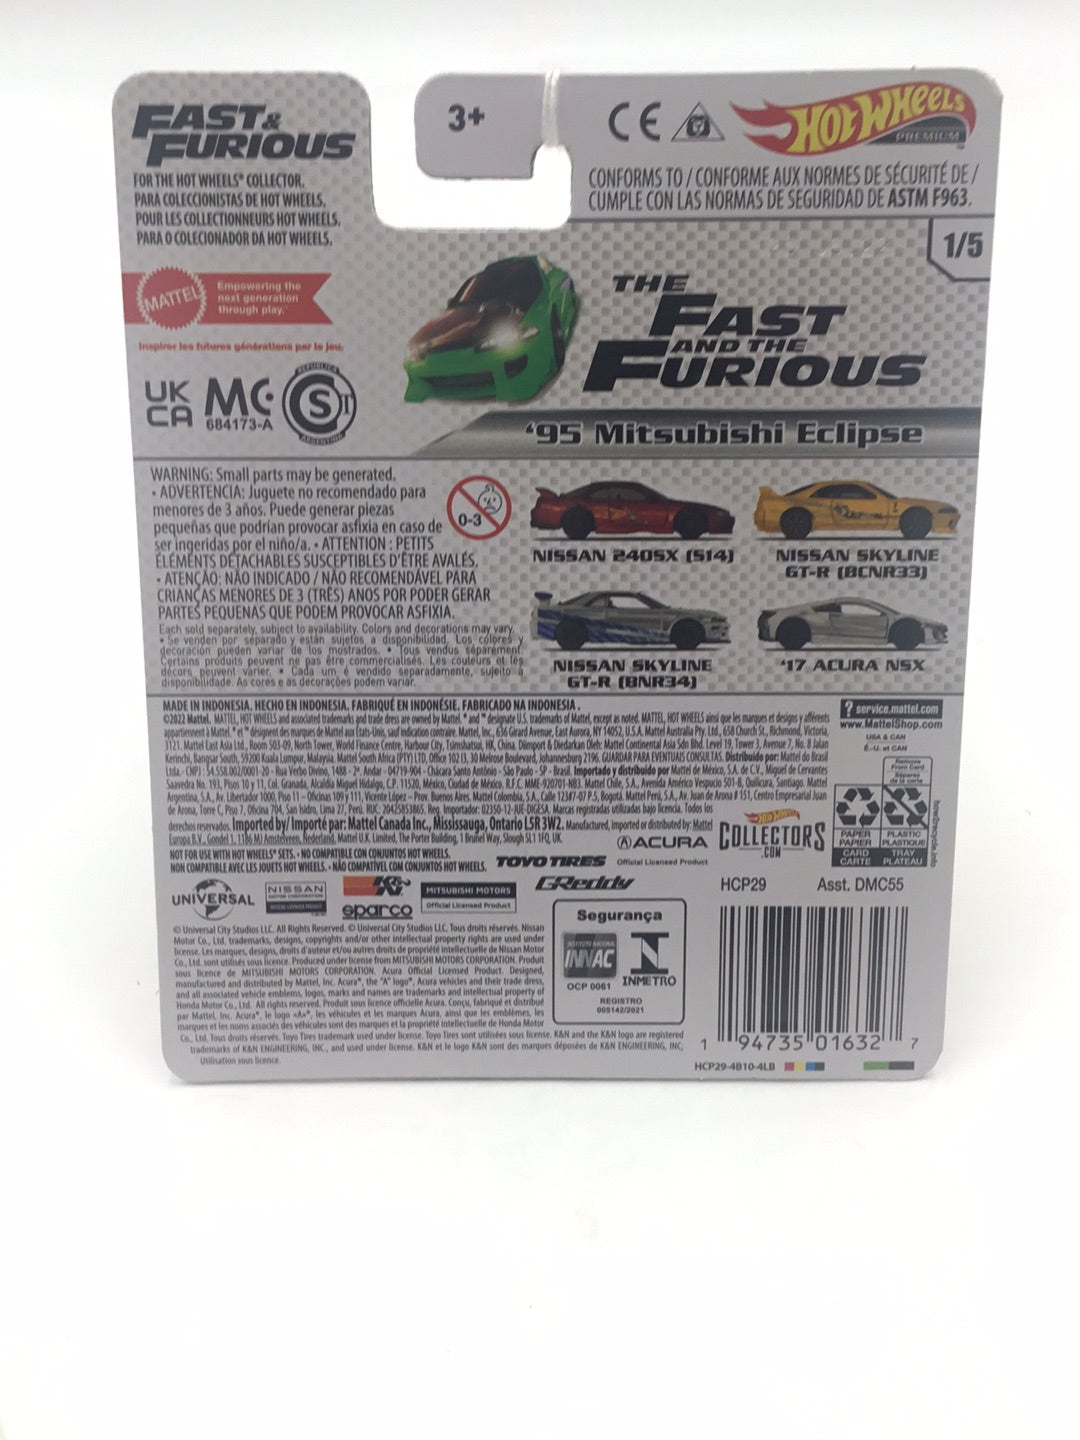 Hot wheels fast and furious #1 95 Misubishi Eclipse 1/5 G2